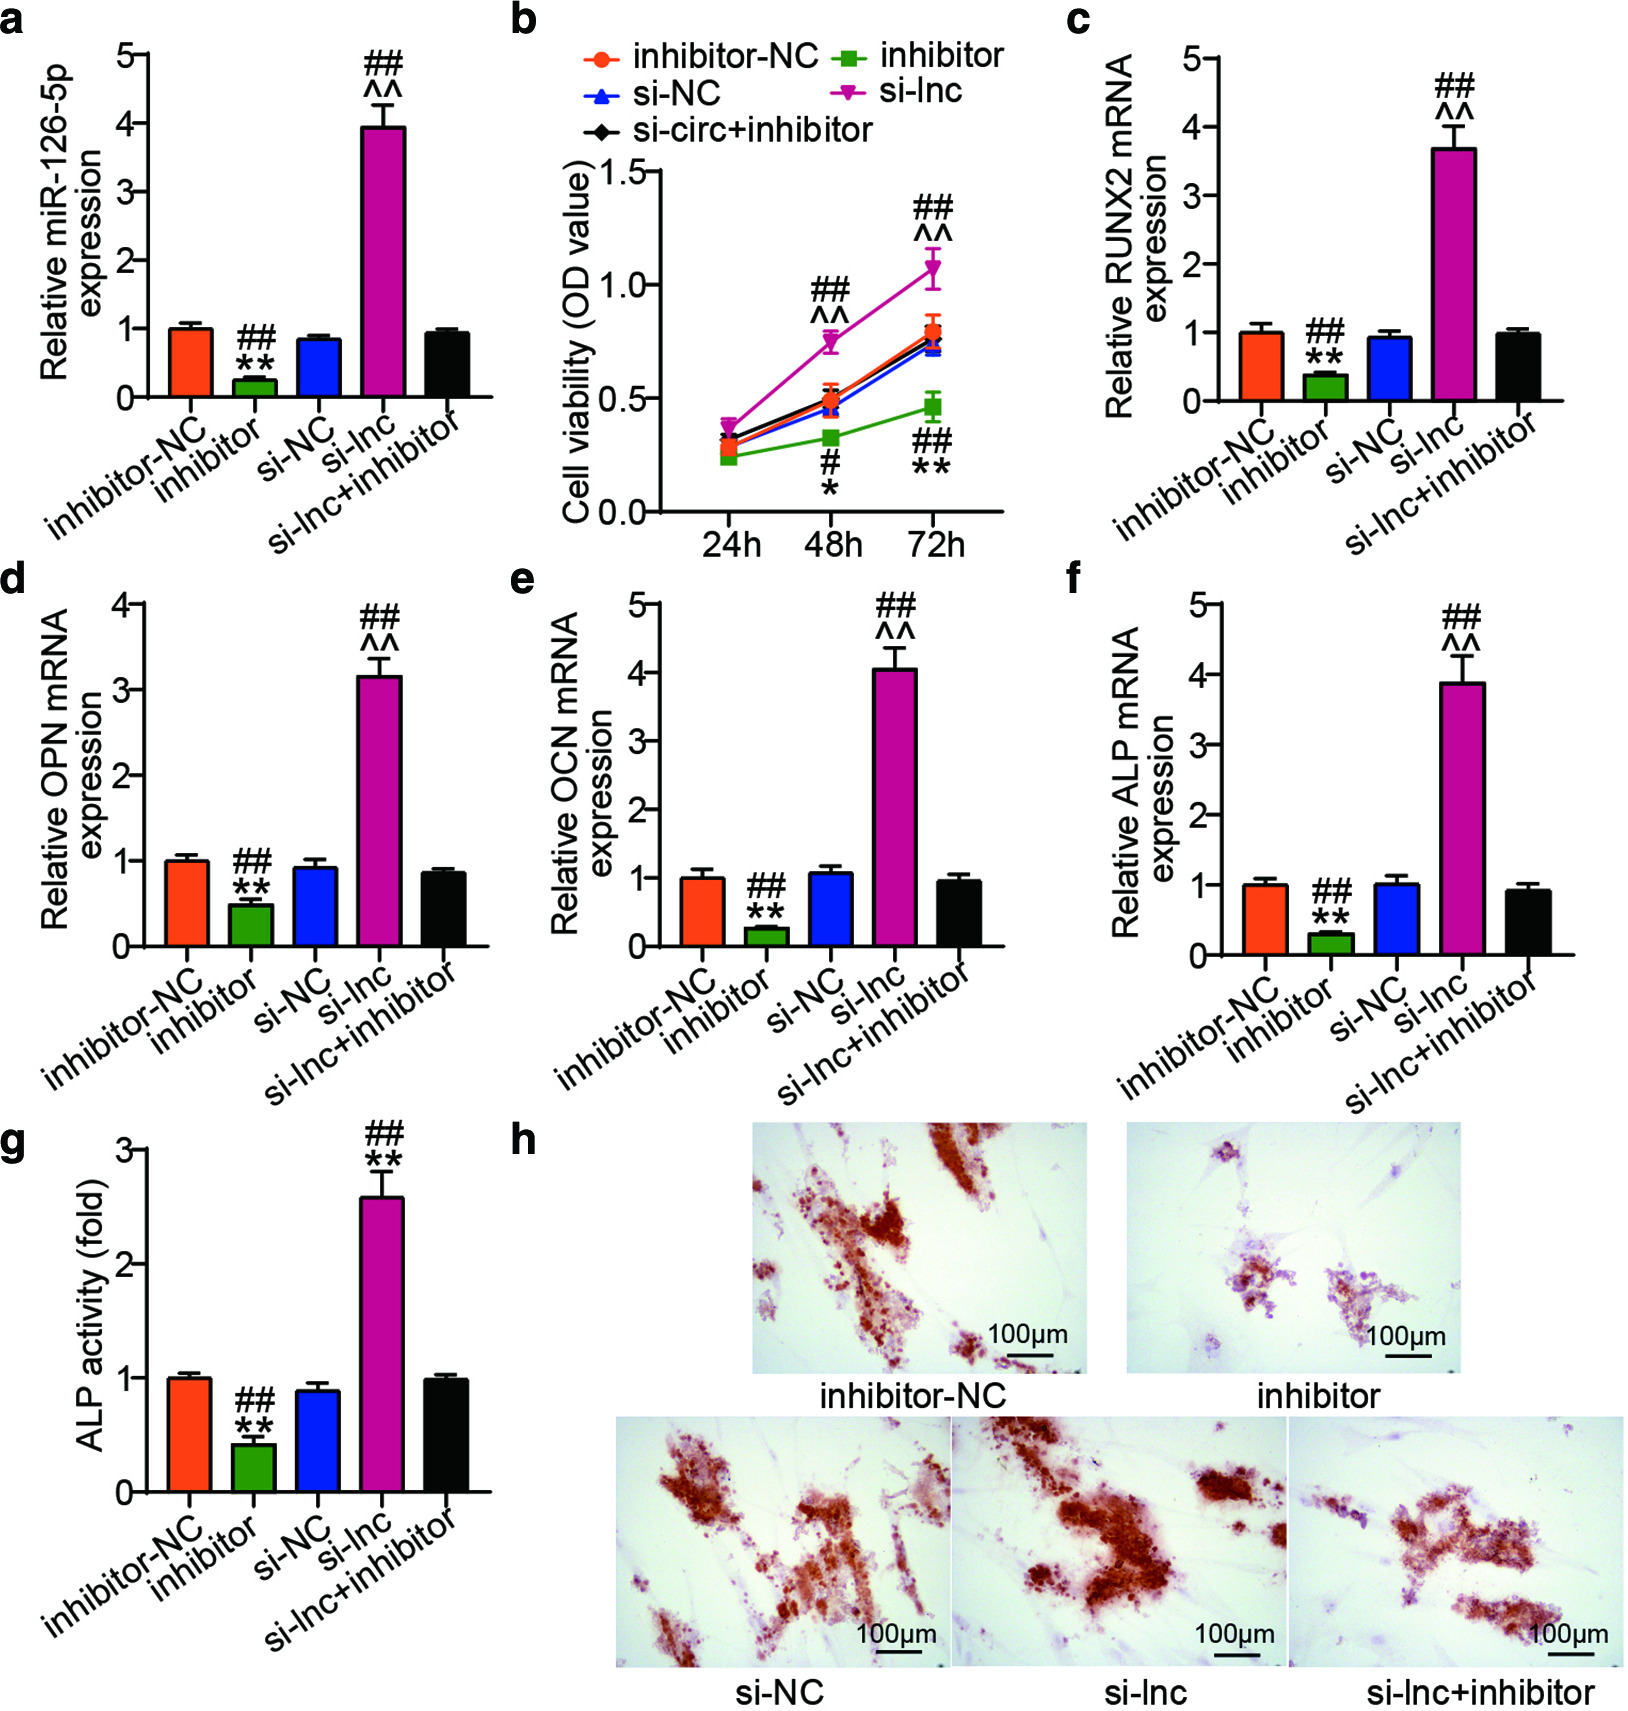 Fig. 4 
            PCBP1 Antisense RNA 1 (PCBP1-AS1) affected human bone marrow-derived mesenchymal stem cell (hBMSC) osteoblast differentiation by sponging microRNA (miR)-126-5p. hBMSCs were co-transfected hBMSCs with inhibitor-NC, miR-126-5p inhibitor (inhibitor), negative control (si-NC), si-PCBP1-AS1 (si-lnc), or si-PCBP1-AS1 + miR-126-5p inhibitor (si-lnc + inhibitor). a) The expression level of miR-126-5p in hBMSCs was detected by quantitative real-time polymerase chain reaction (qRT-PCR). b) Cell proliferation of hBMSCs was measured by Cell Counting Kit-8 (CCK-8) assay. c) to f) The expression level of osteogenesis-related genes (Runt-related transcription factor 2 (RUNX2), osteopontin (OPN), osteocalcin (OCN), and alkaline phosphatase (ALP)) were determined with the help of qRT-PCR. g) ALP activity was determined by ALP quantification. h) Calcium deposits in hBMSCs were detected by Alizarin red staining. The data represent the mean (standard deviation). *p < 0.05, **p < 0.001 compared with inhibitor-NC, ^^p < 0.001 compared with si-NC, #p < 0.05, ##p < 0.001 compared with si-lnc+ inhibitor; calculated using one-way analysis of variance. mRNA, messenger RNA; OD, optical density; si-circ, silence circle RNA.
          